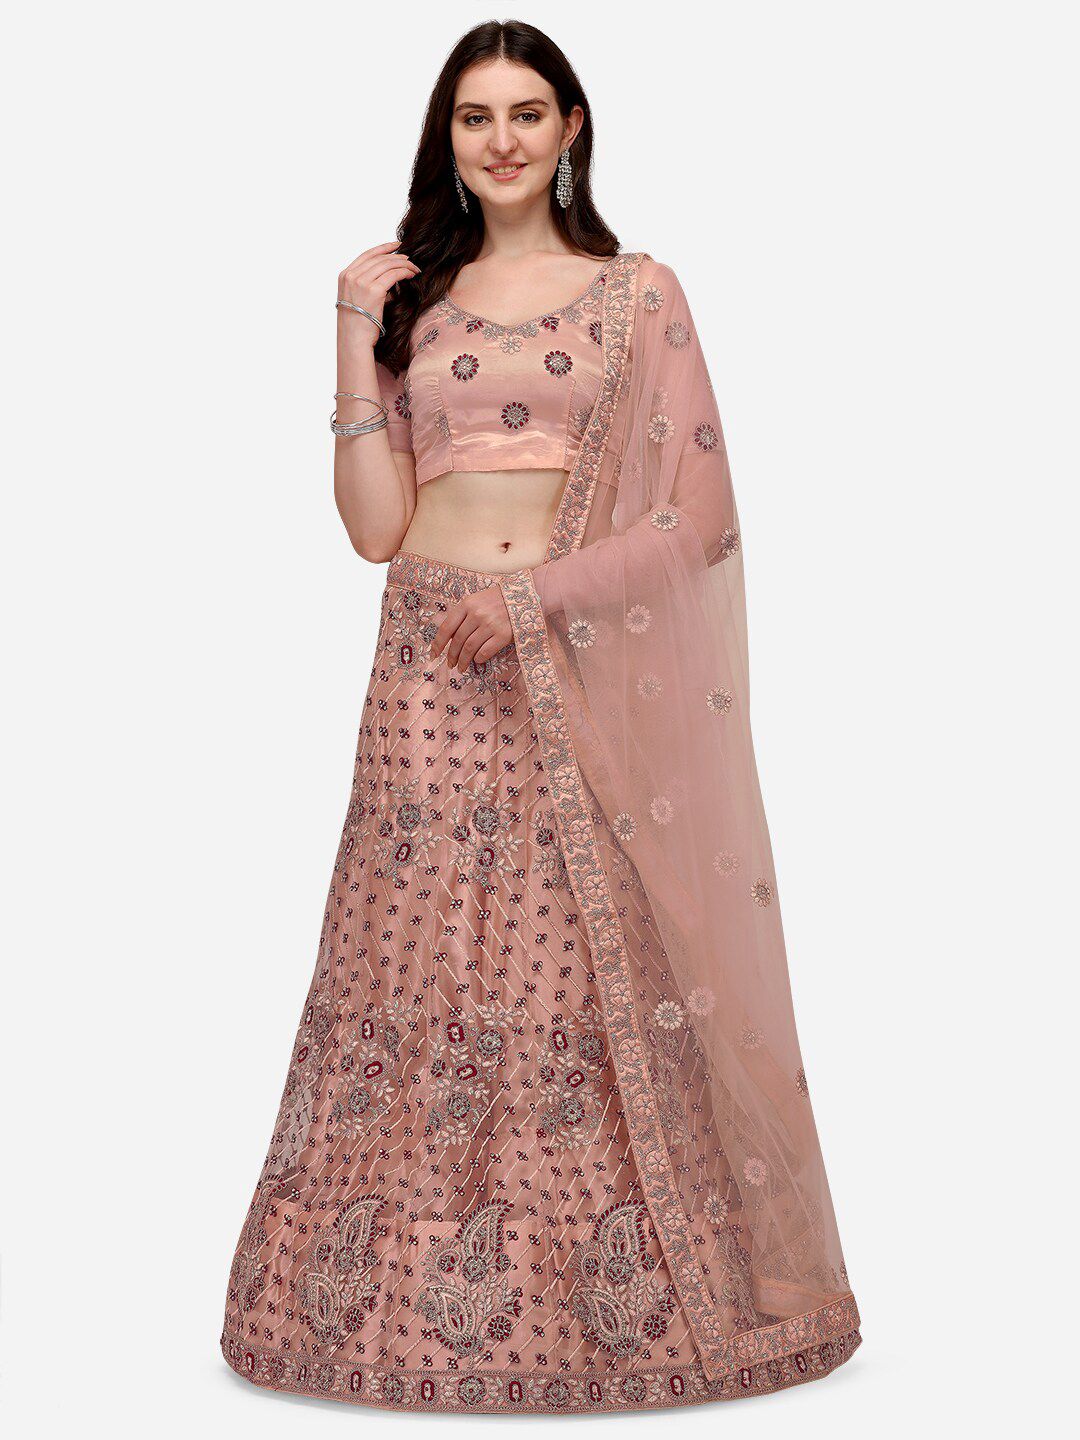 VRSALES Peach-Coloured Embroidered Semi-Stitched Lehenga & Unstitched Blouse With Dupatta Price in India